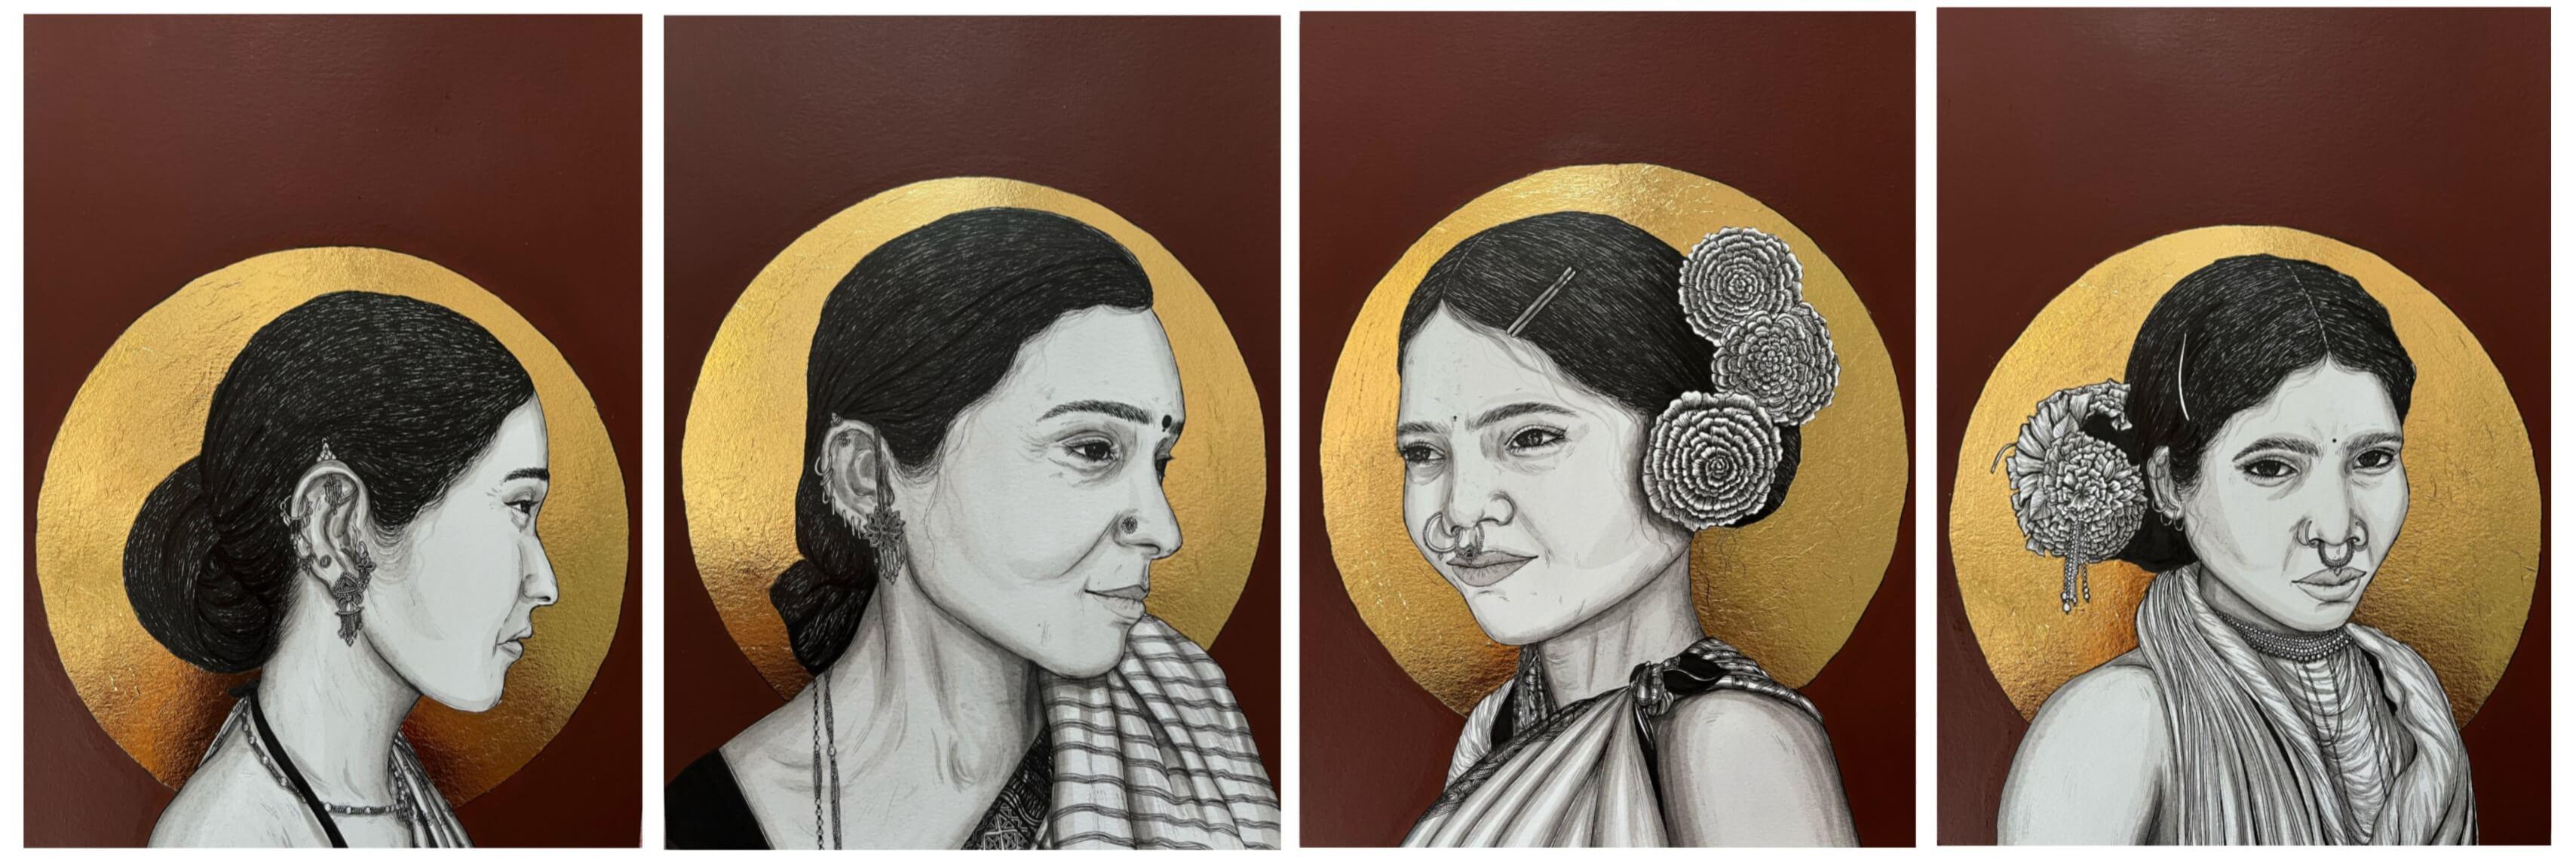 Kapil Anant Figurative Painting - Indian Culture, Ink, Acrylic, Gold Foil by Contemporary Indian Artist "In Stock"